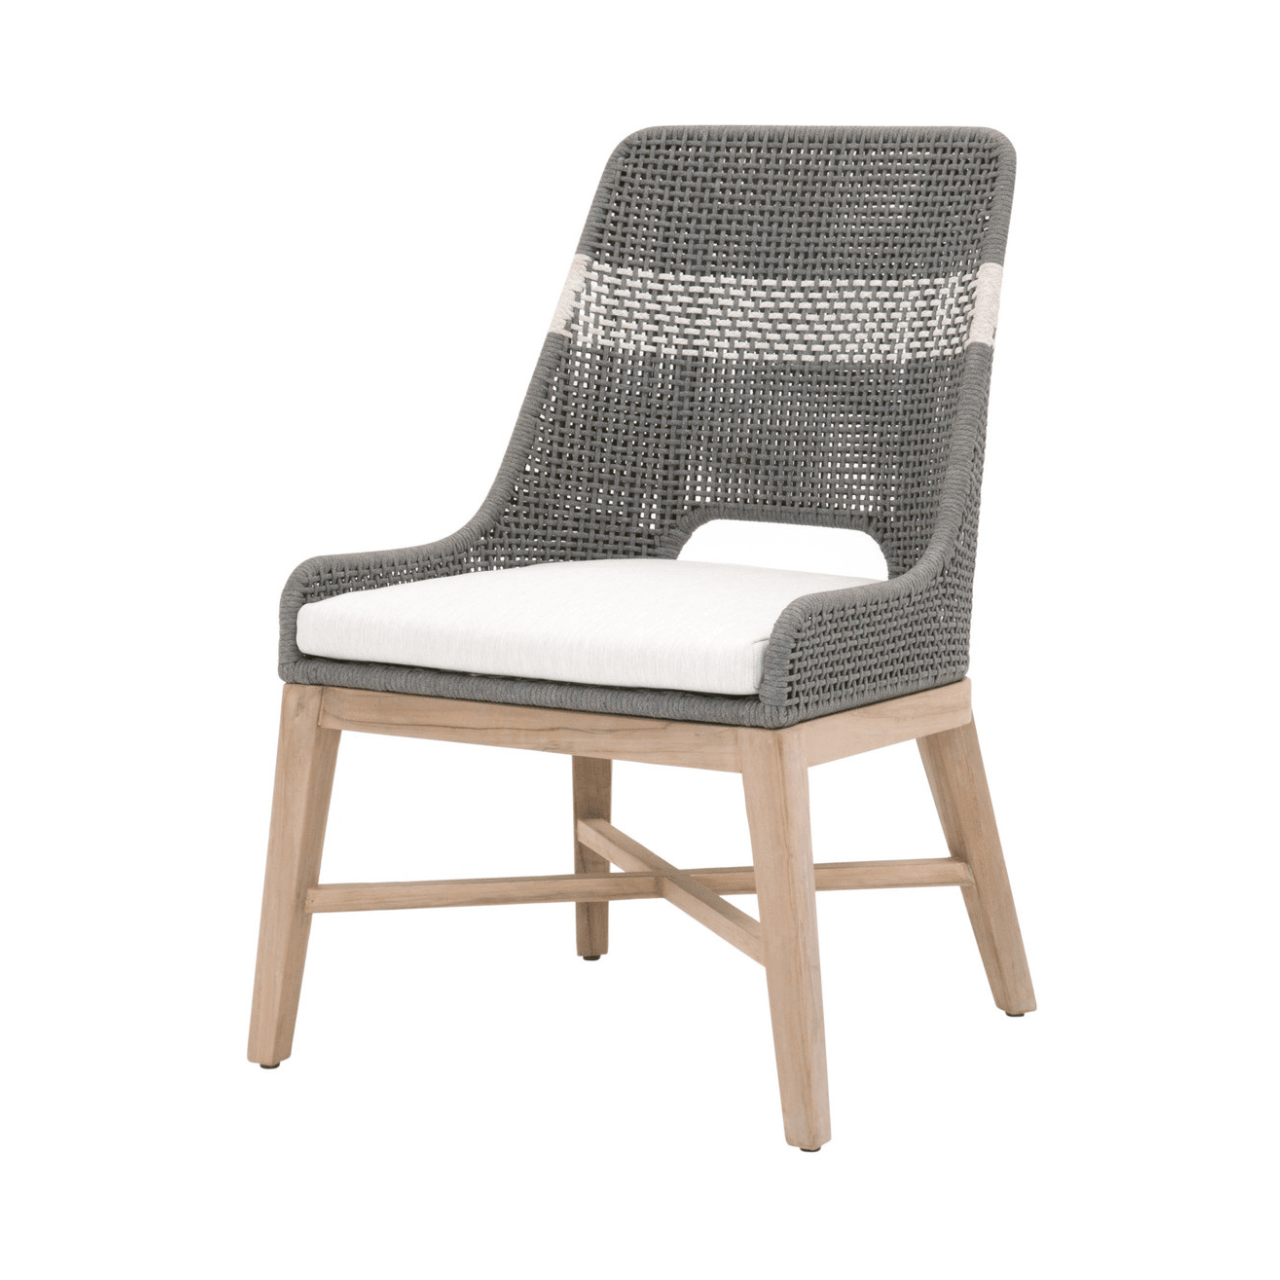 Woven Tapestry Outdoor Dining Chair | Set of 2